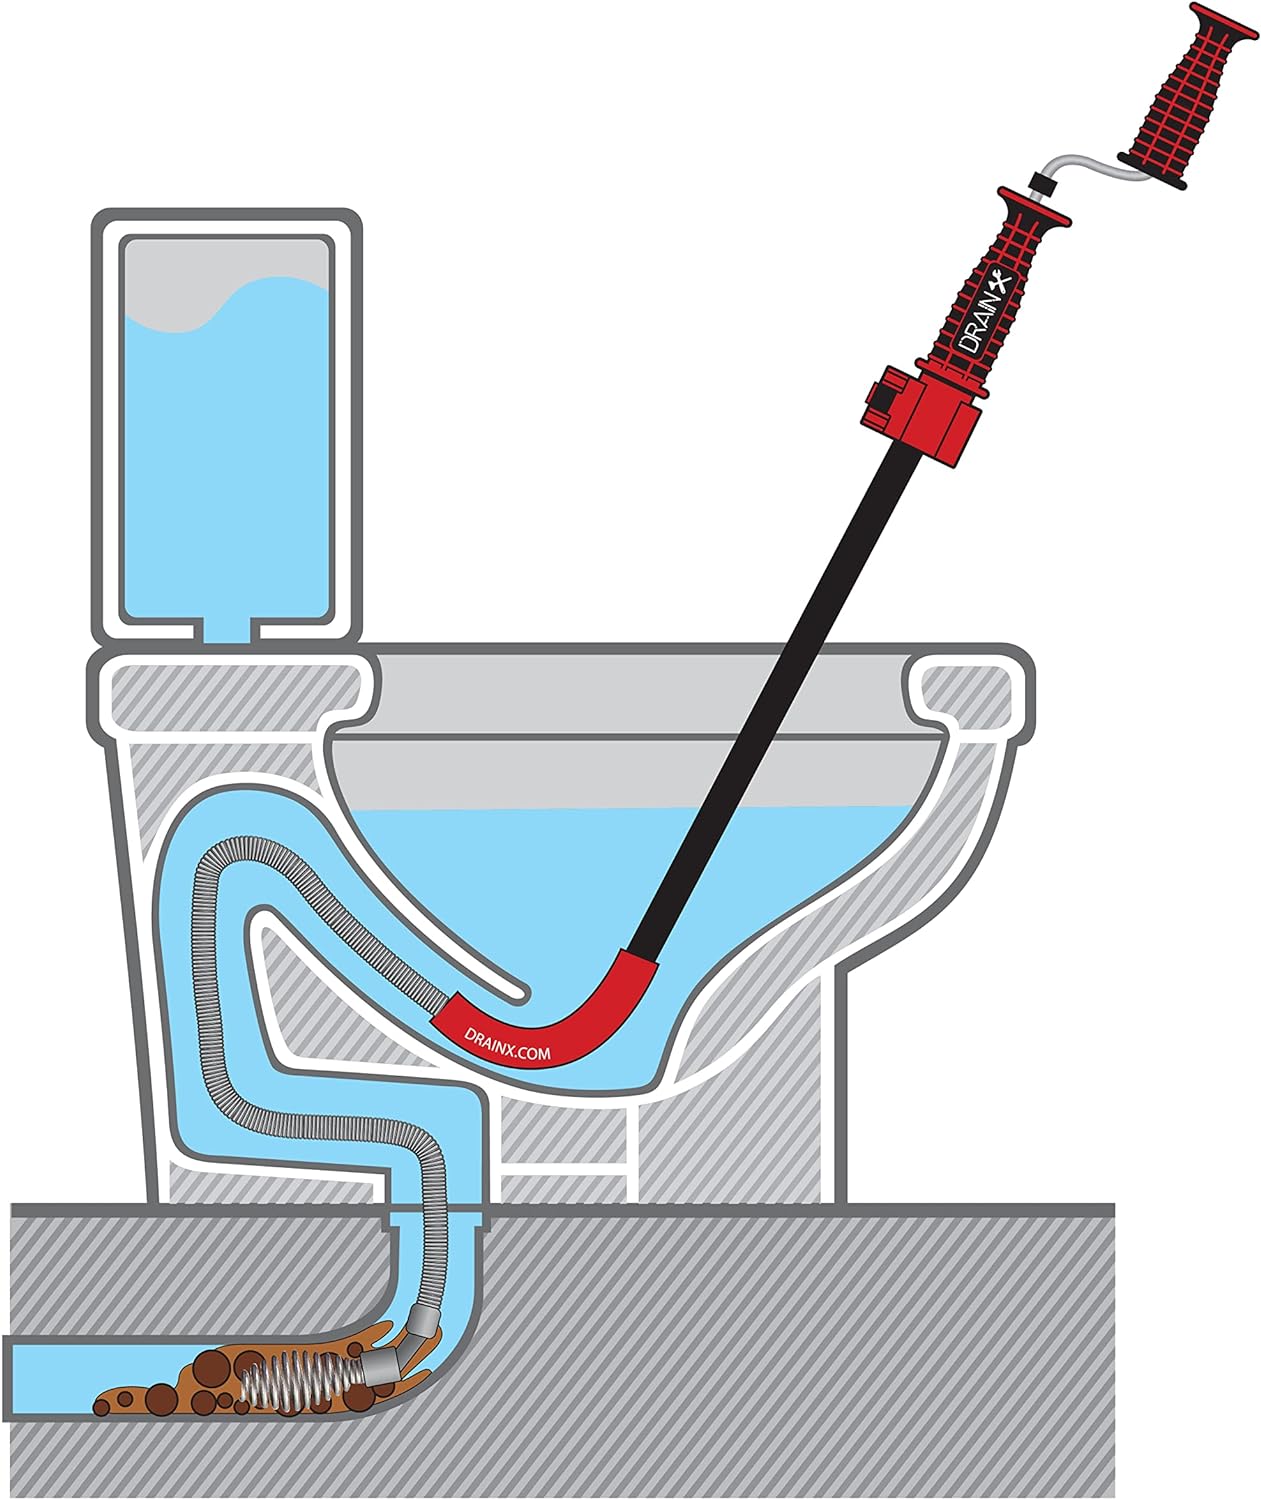 DrainX 6 Foot Toilet Auger | Manual or Drill Powered Closet Auger with Drop Head for T-Junction Pipes, Plastic Angled Guard for Porcel